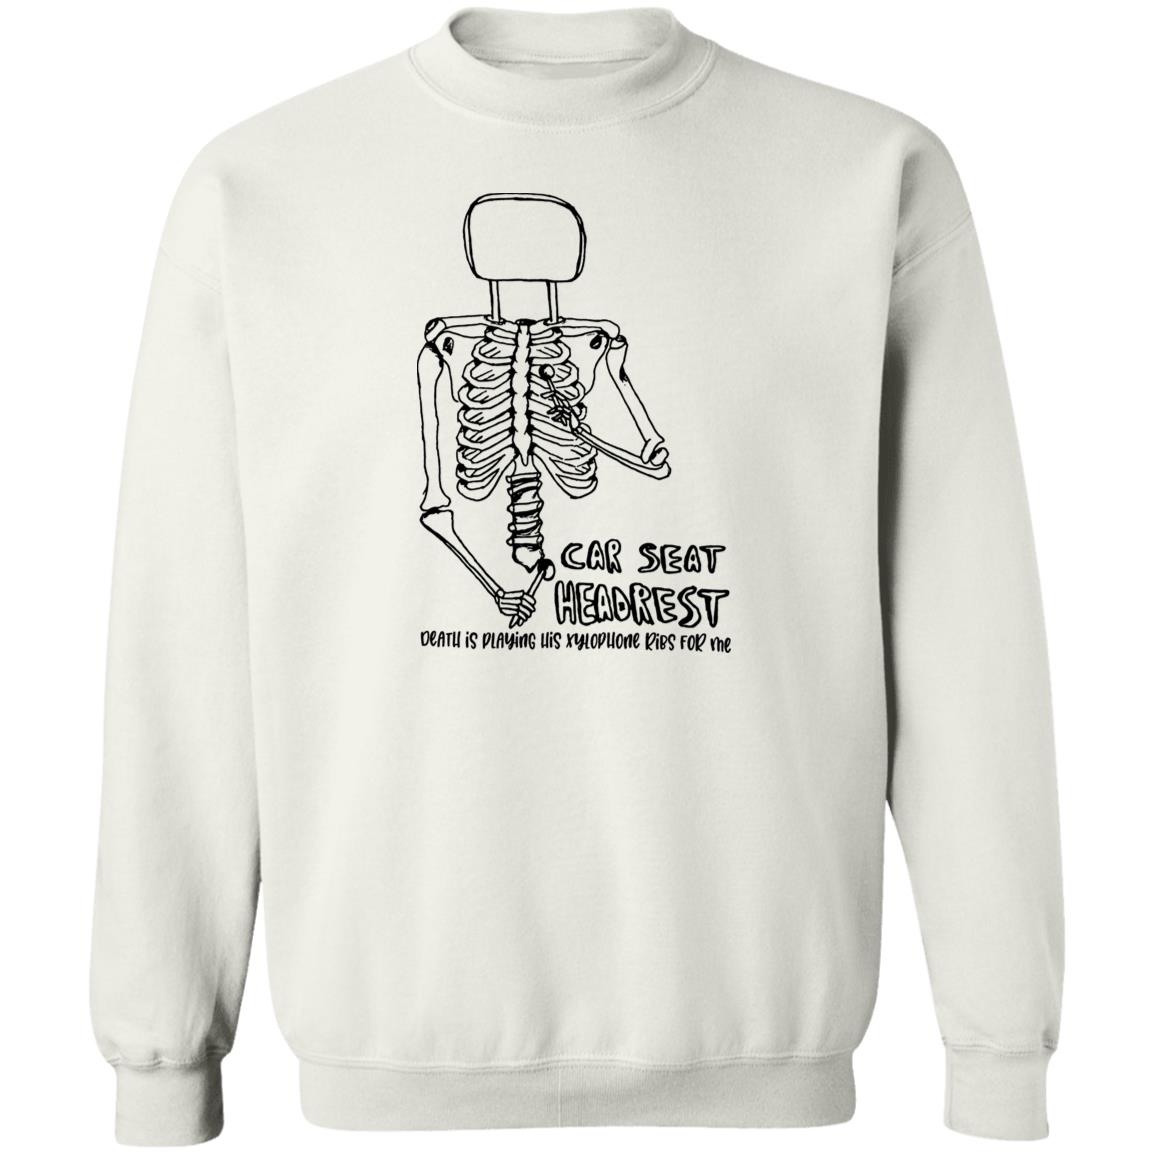 Car Seat Headrest Death Is Playing His Xylophone Ribs For Me Shirt Panetory – Graphic Design Apparel &Amp; Accessories Online